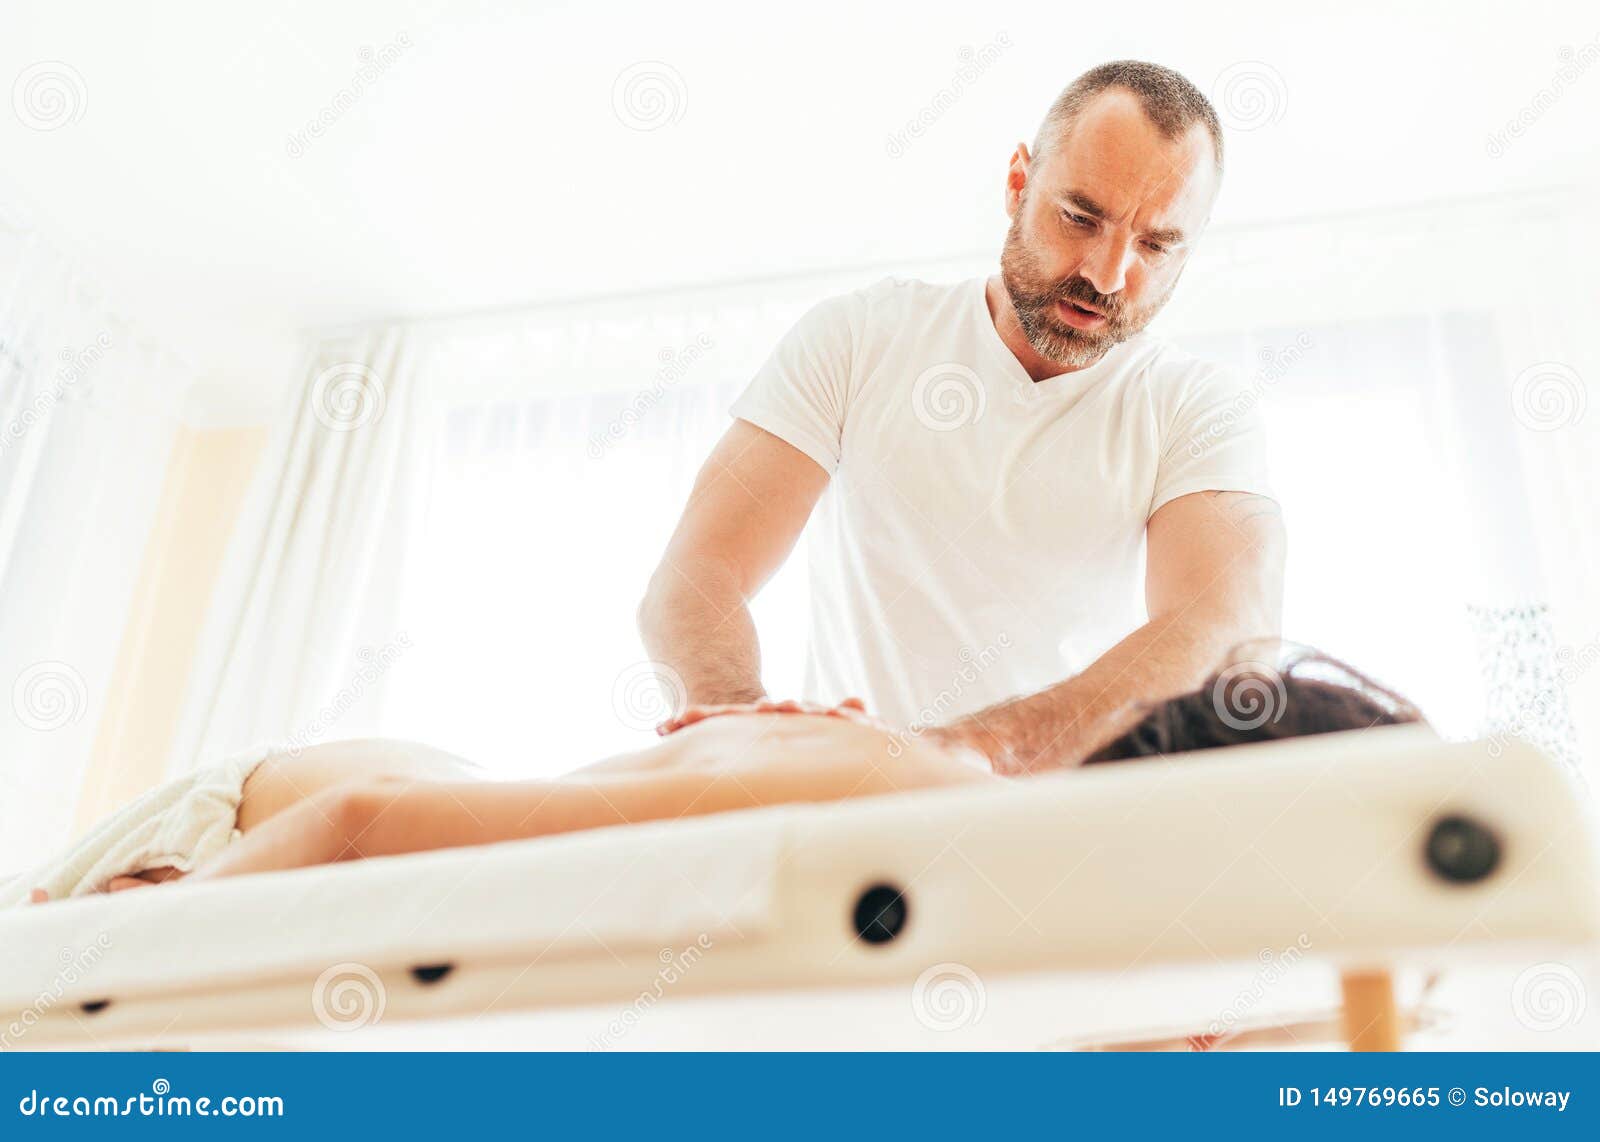 Masseur Man Doing Massage Manipulations On The Client Back And Communicate With Patient Stock